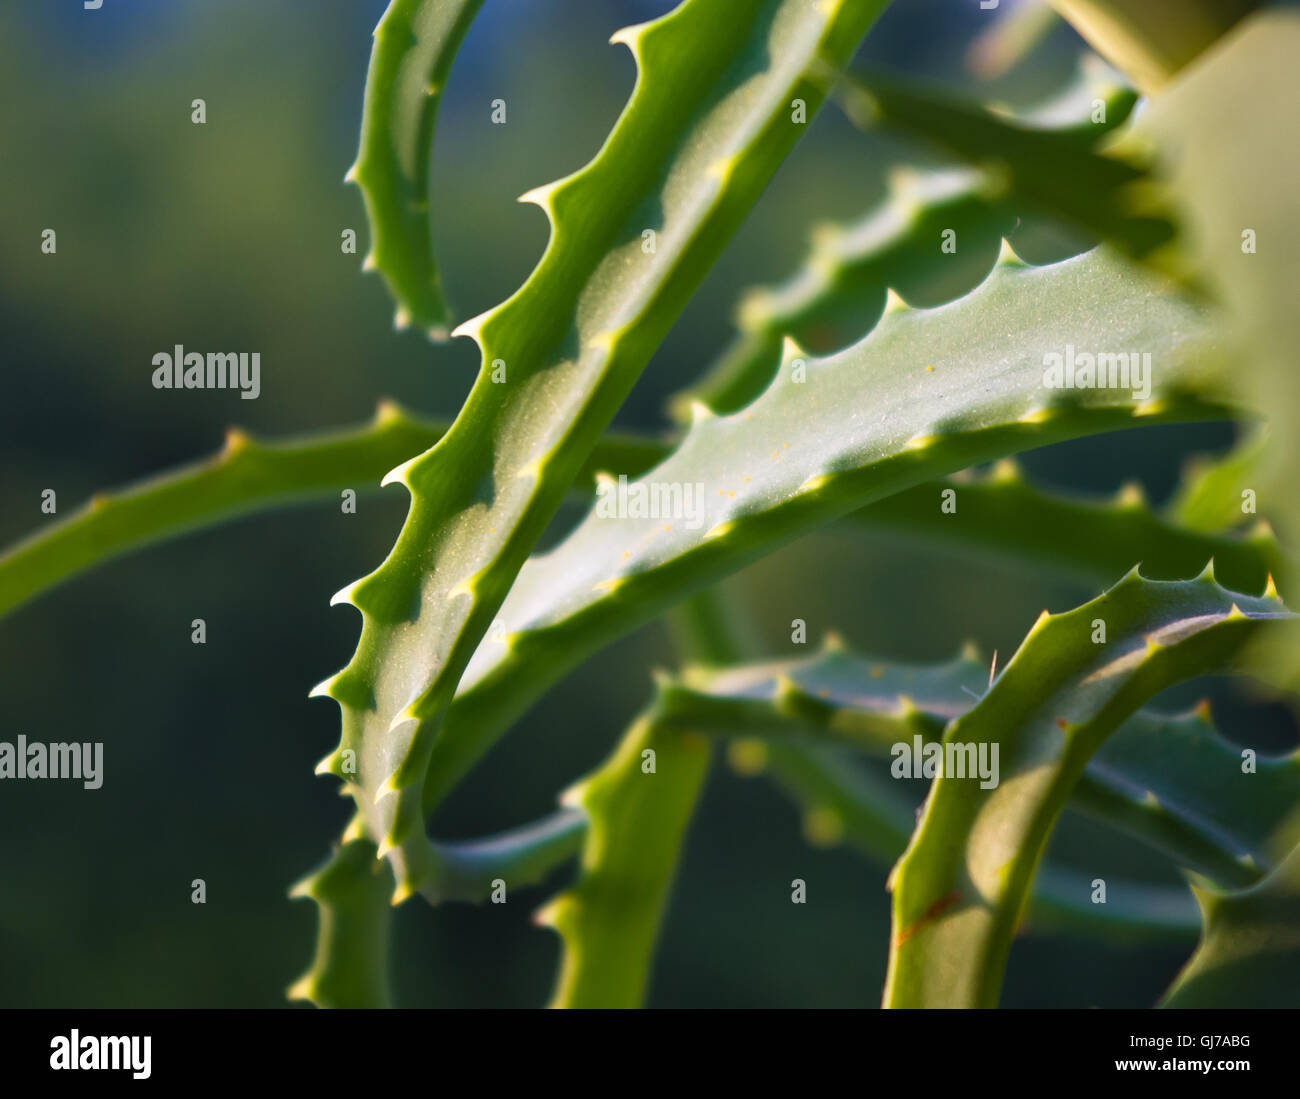 green prickly aloe leaves on a natural background, close-up Stock Photo